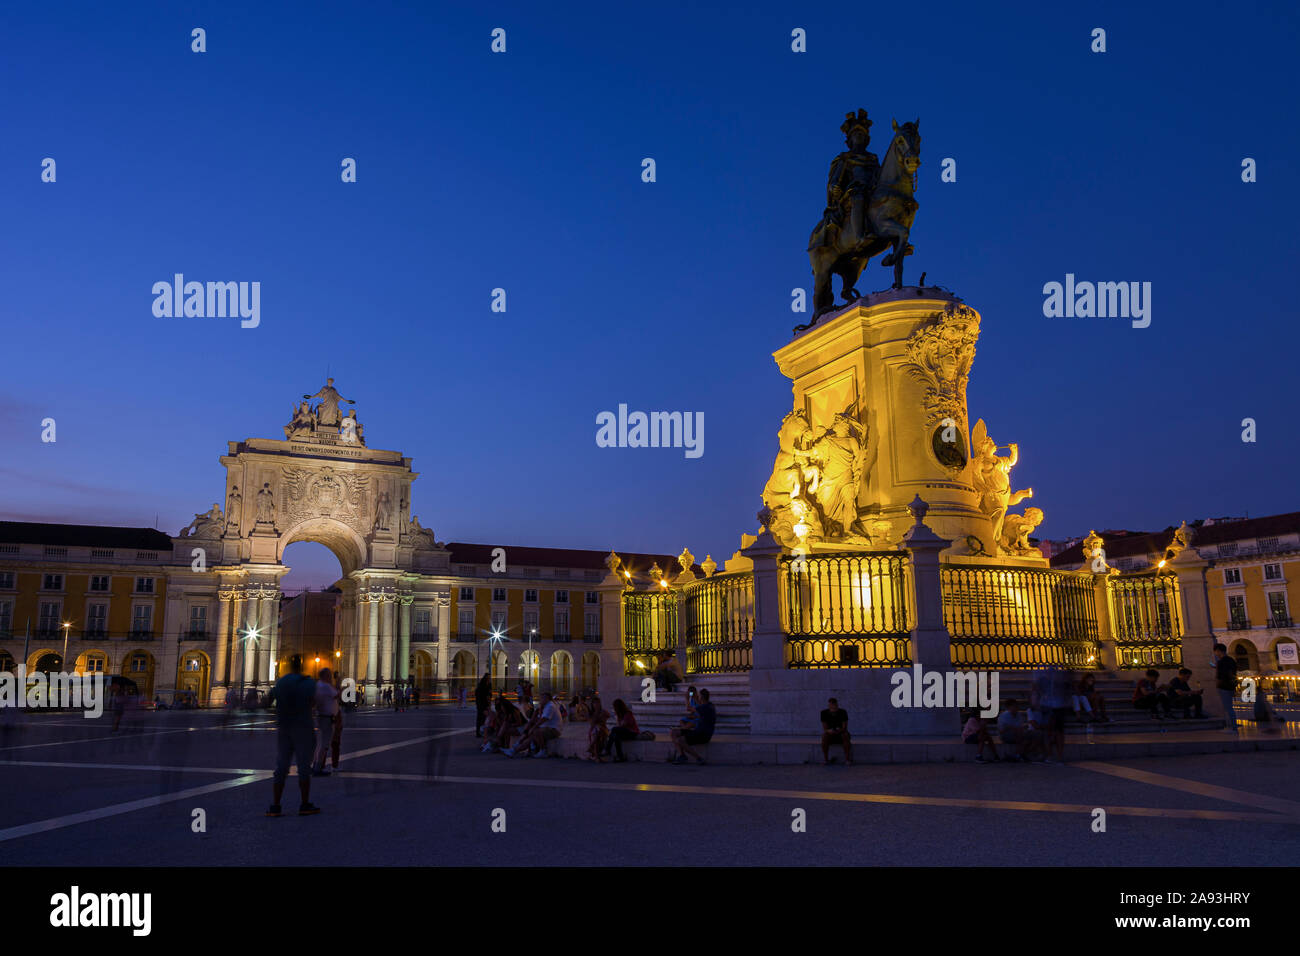 The 18th century Arco da Rua Augusta (triumphal arch gateway), tourists and statue of King Jose I at the Praca do Comercio square in Lisbon at dusk. Stock Photo